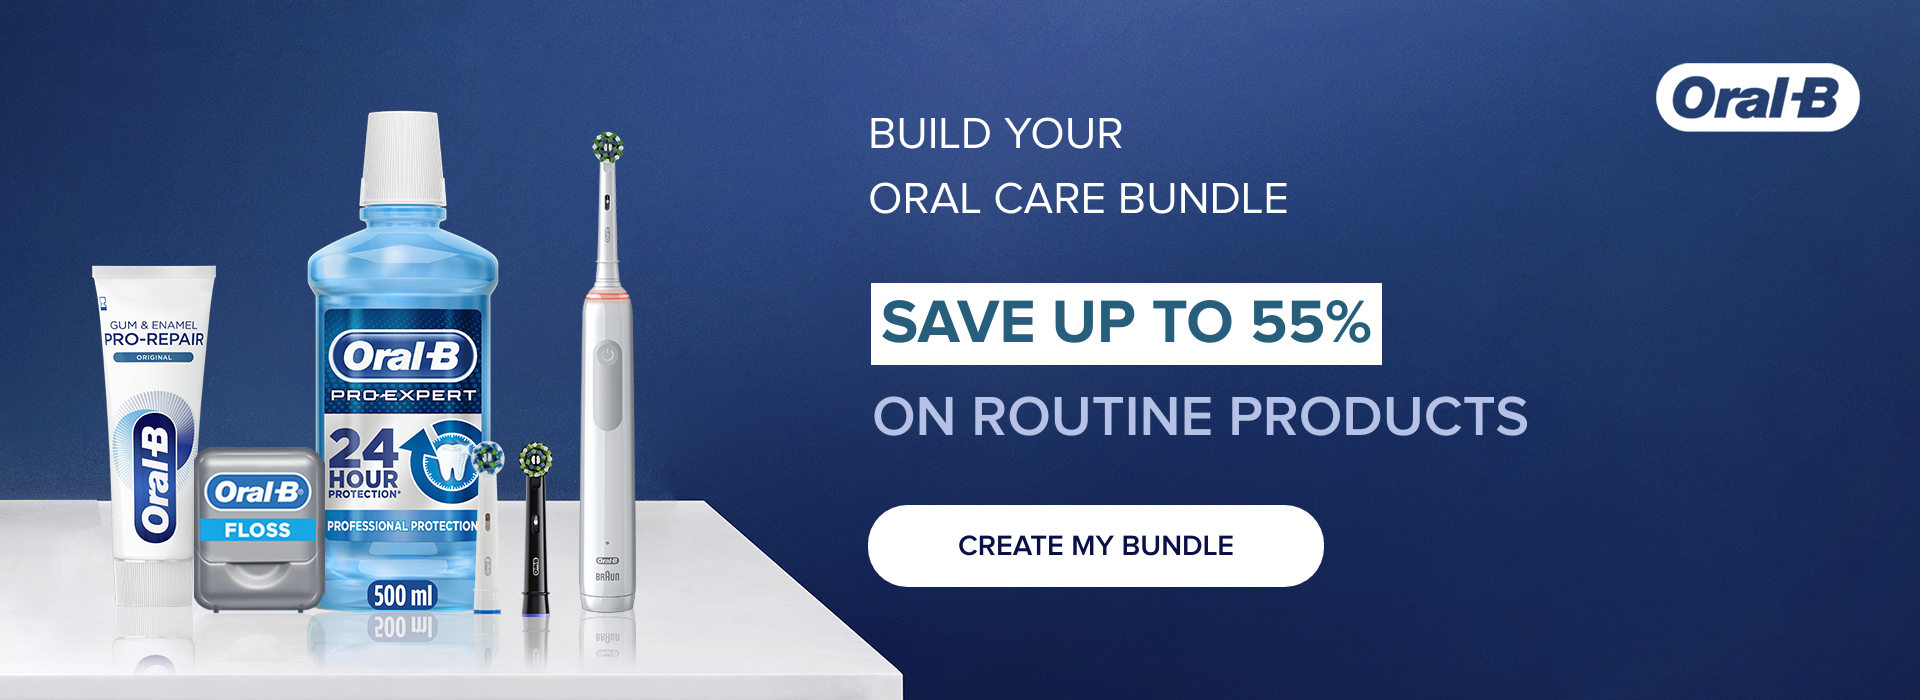 Build your oral-b care bundle. Save up to 55% on routine products create my bundle